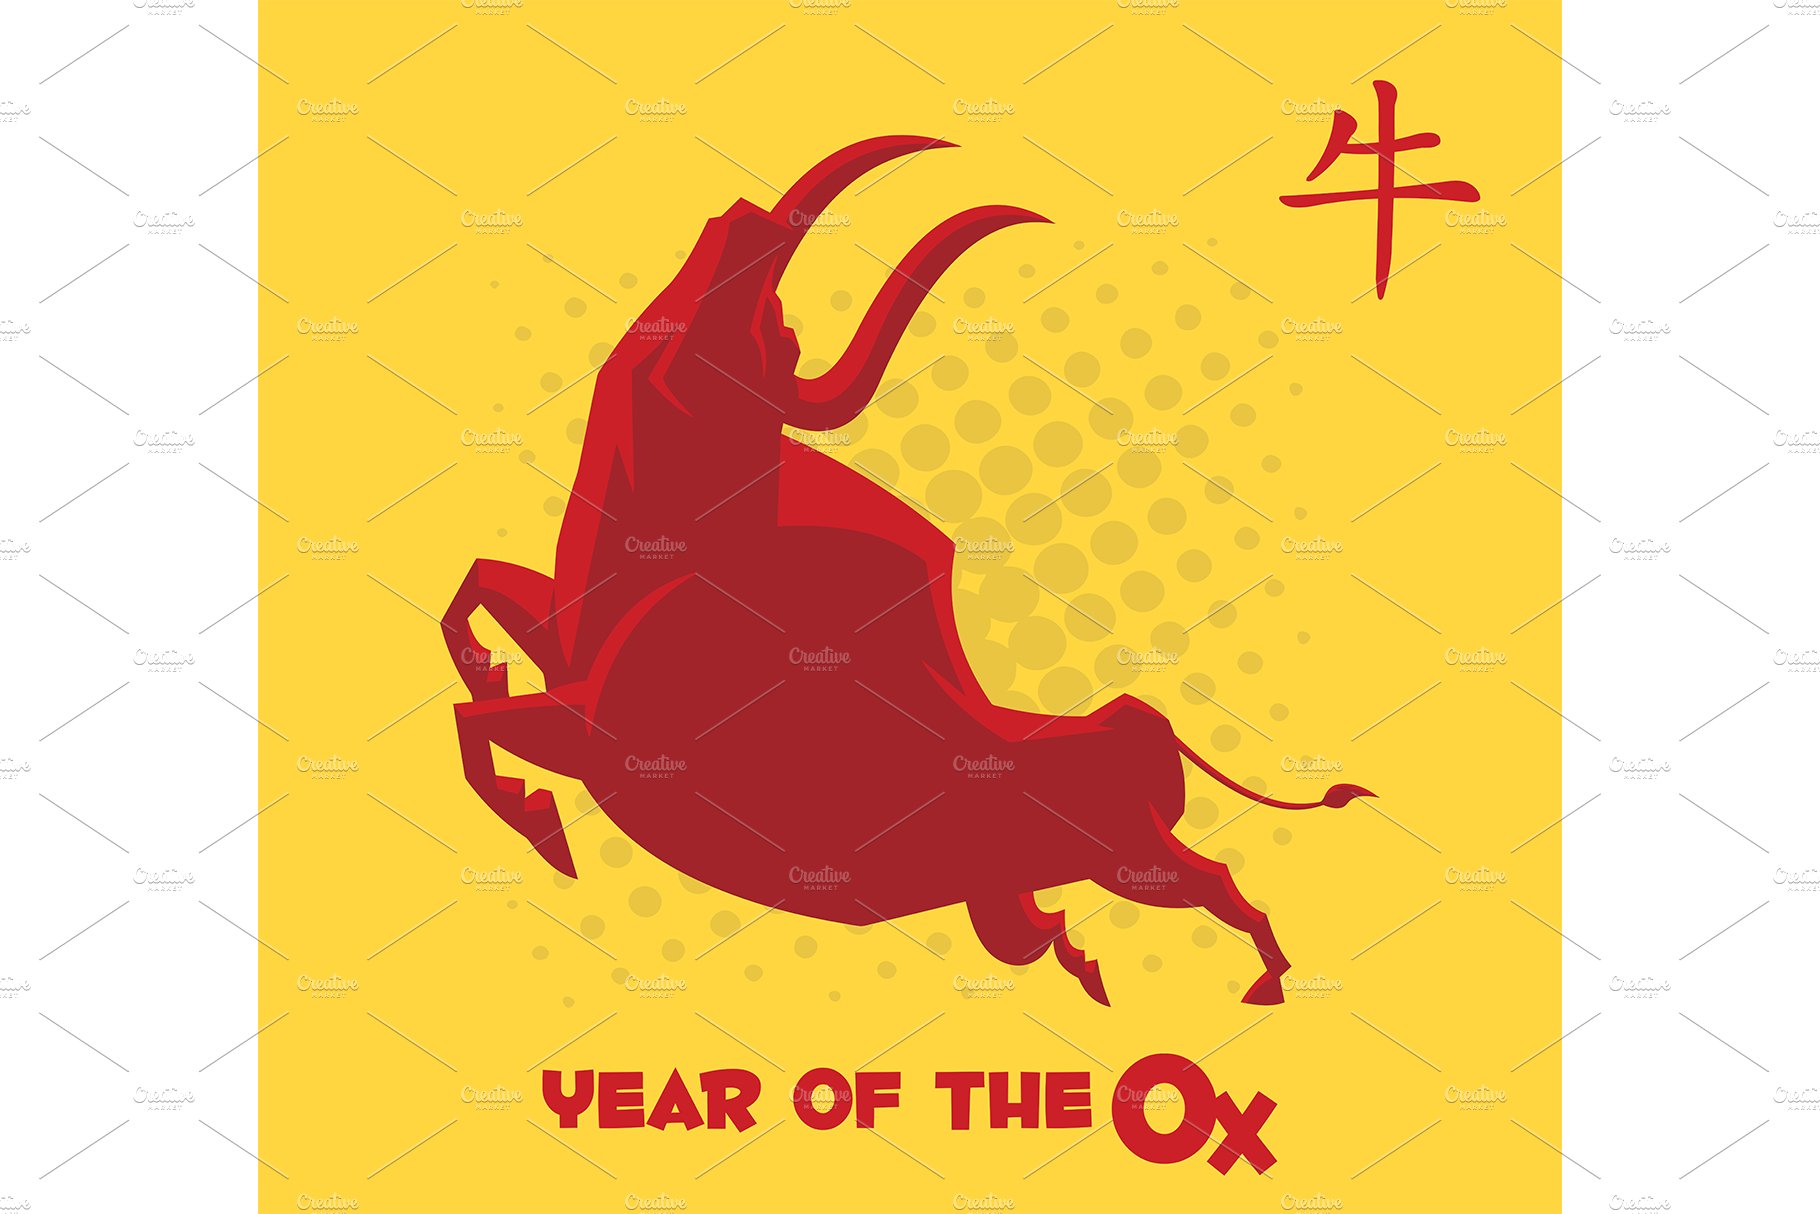 2021 Year Of The Ox PostCard cover image.